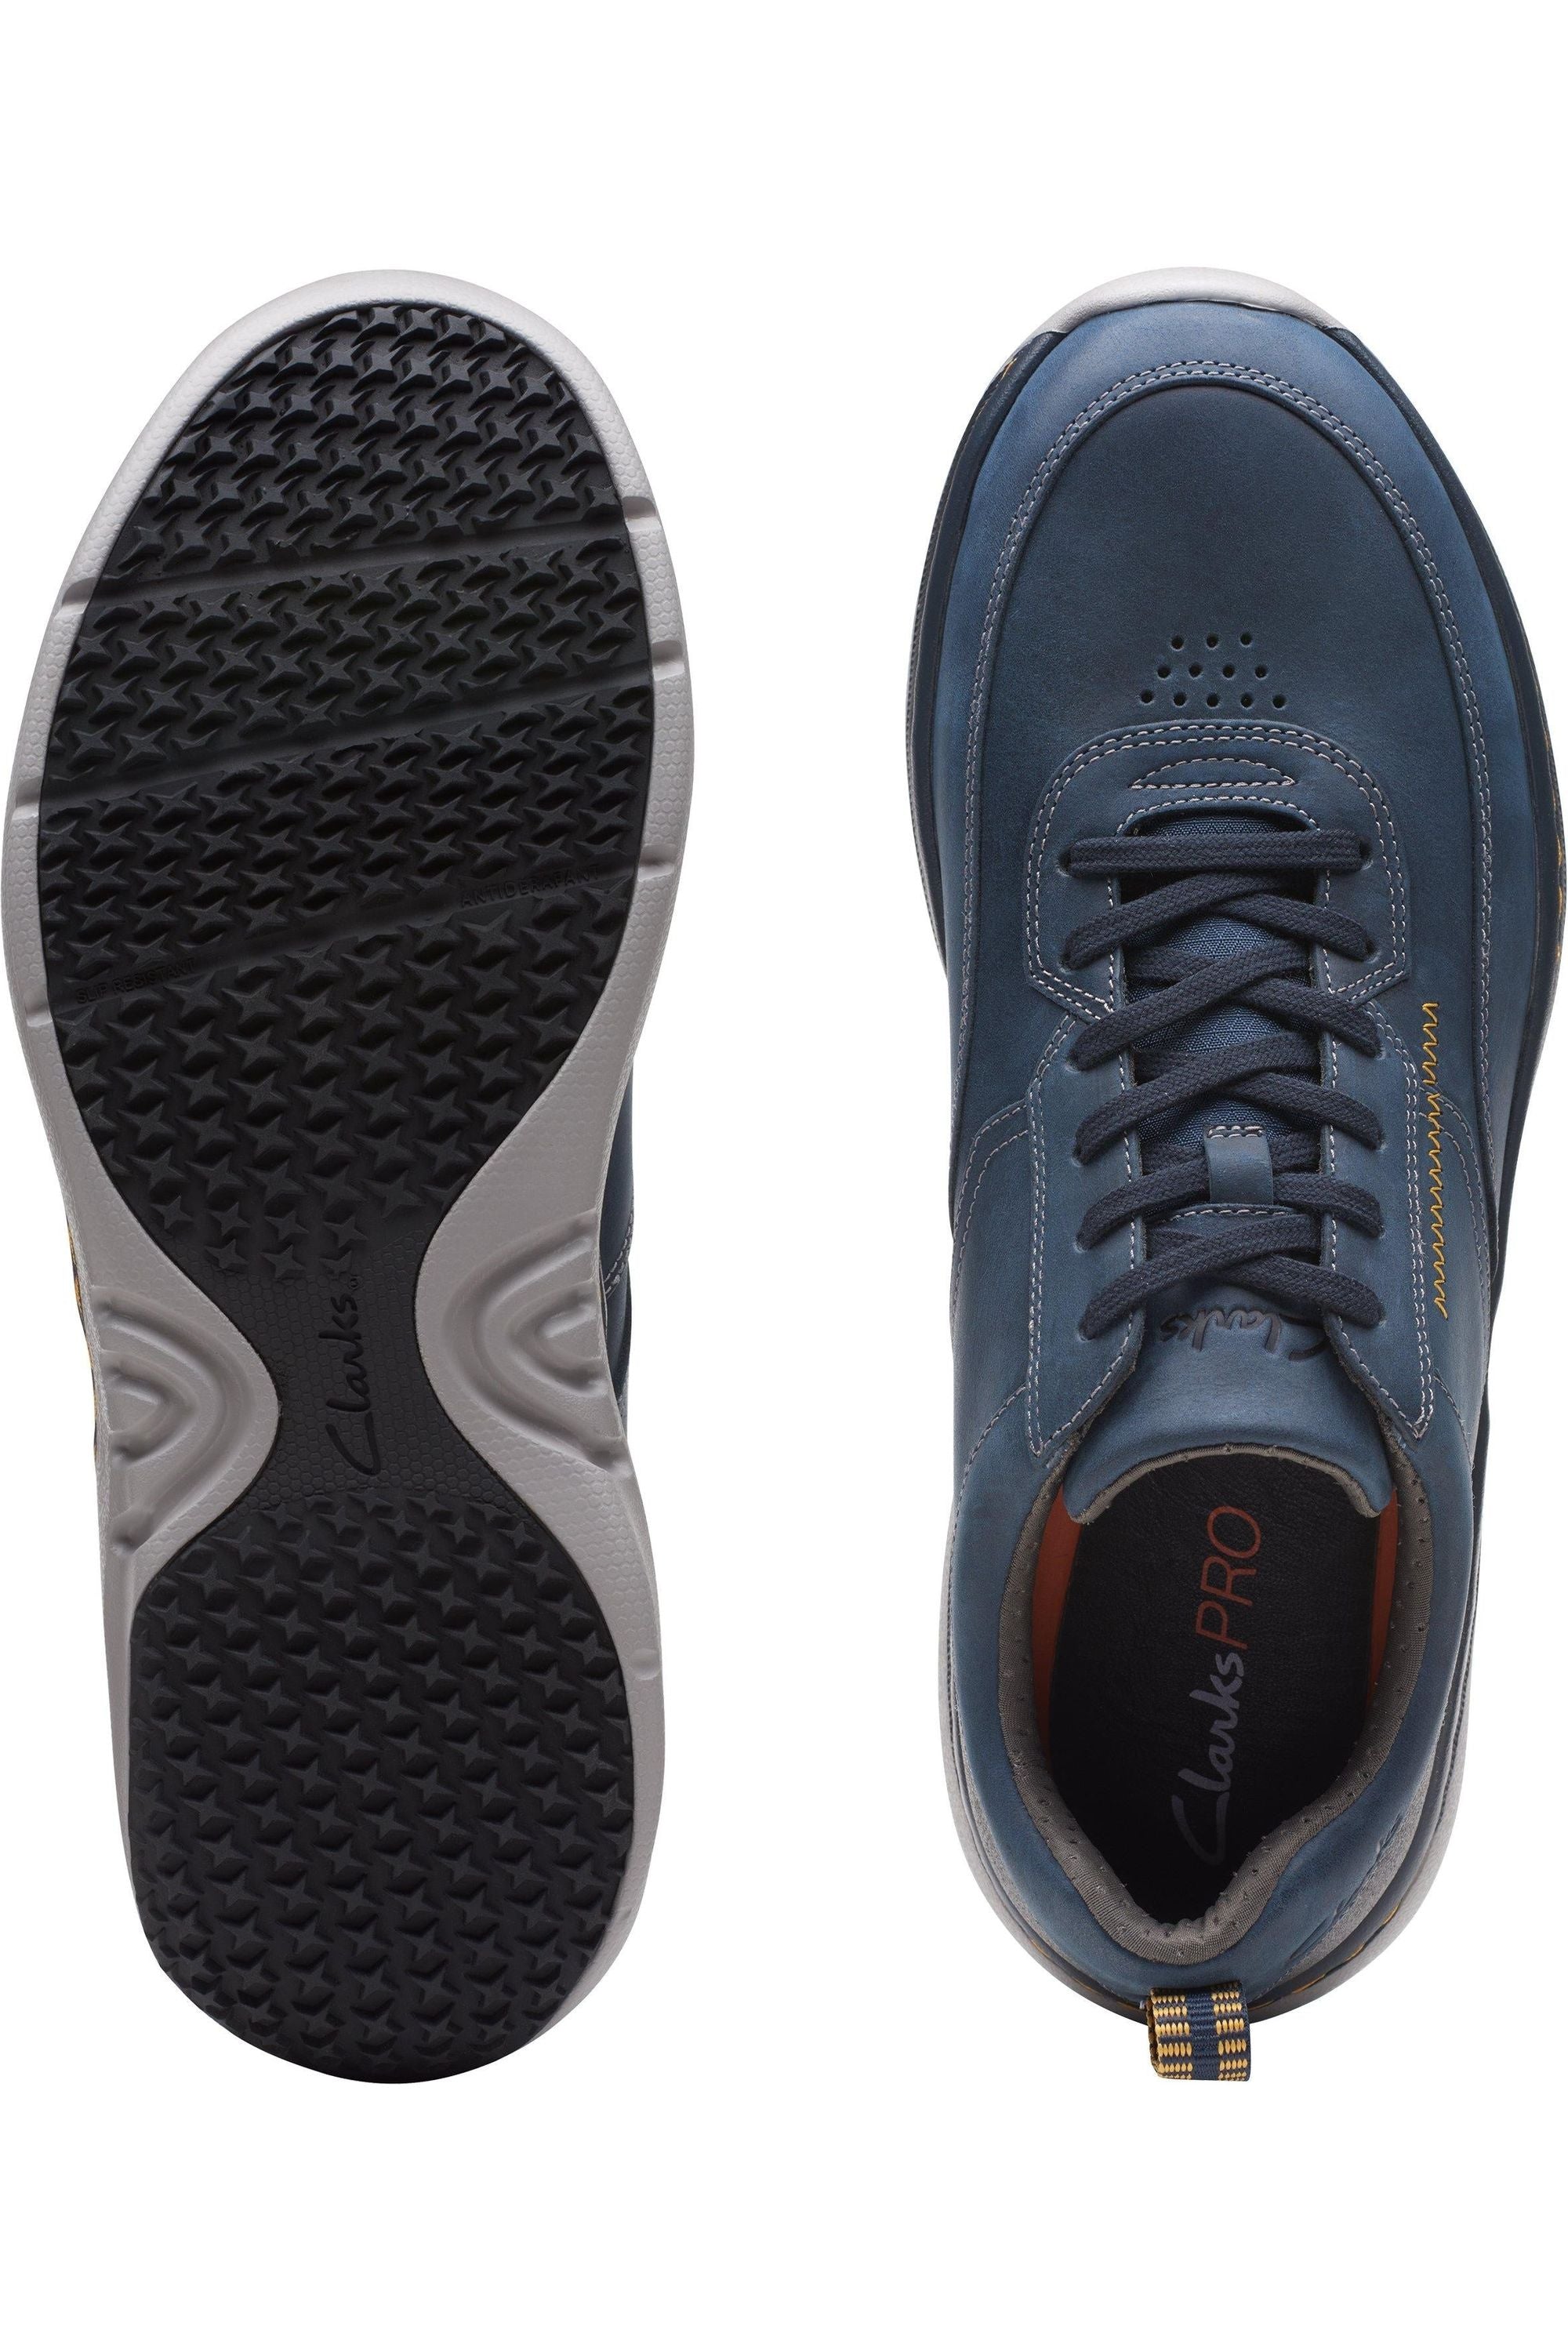 Clarks ClarksPro Lace in Navy Leather